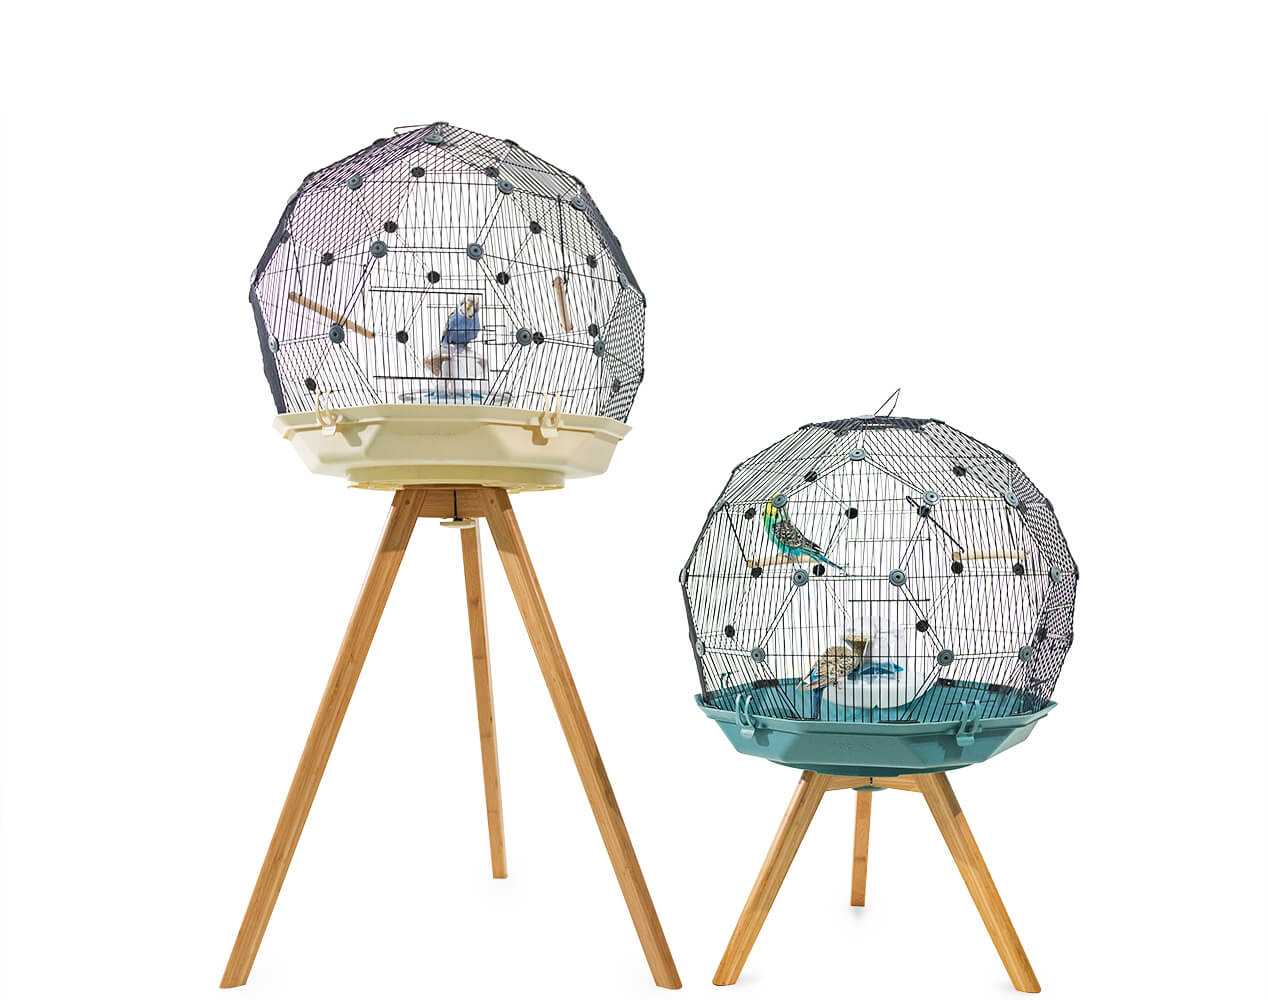 A Geo Bird Cage in cream on a standard height wooden bird cage stand next to a Geo Bird cage in teal on a low height wooden bird cage stand